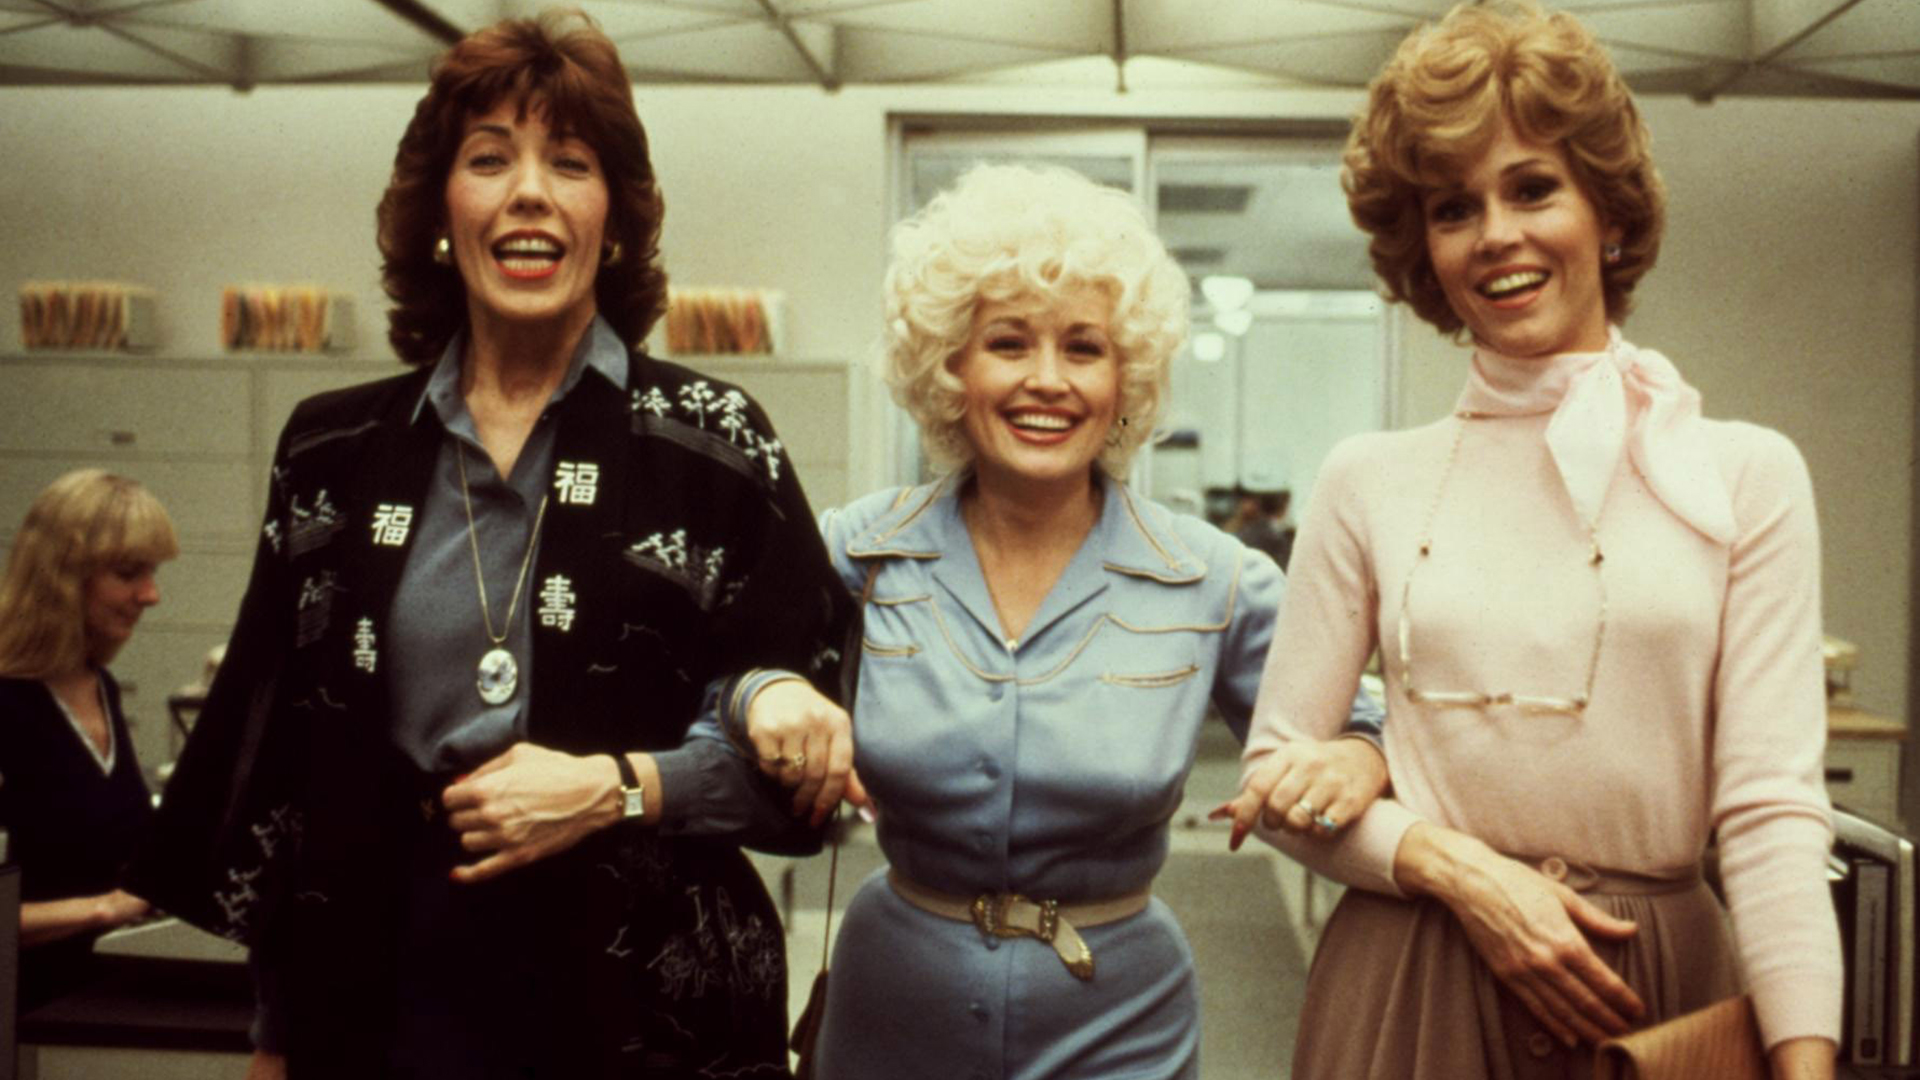 February 21, 1981: Dolly Parton's "9 to 5" Hit No. 1 and Became a ...